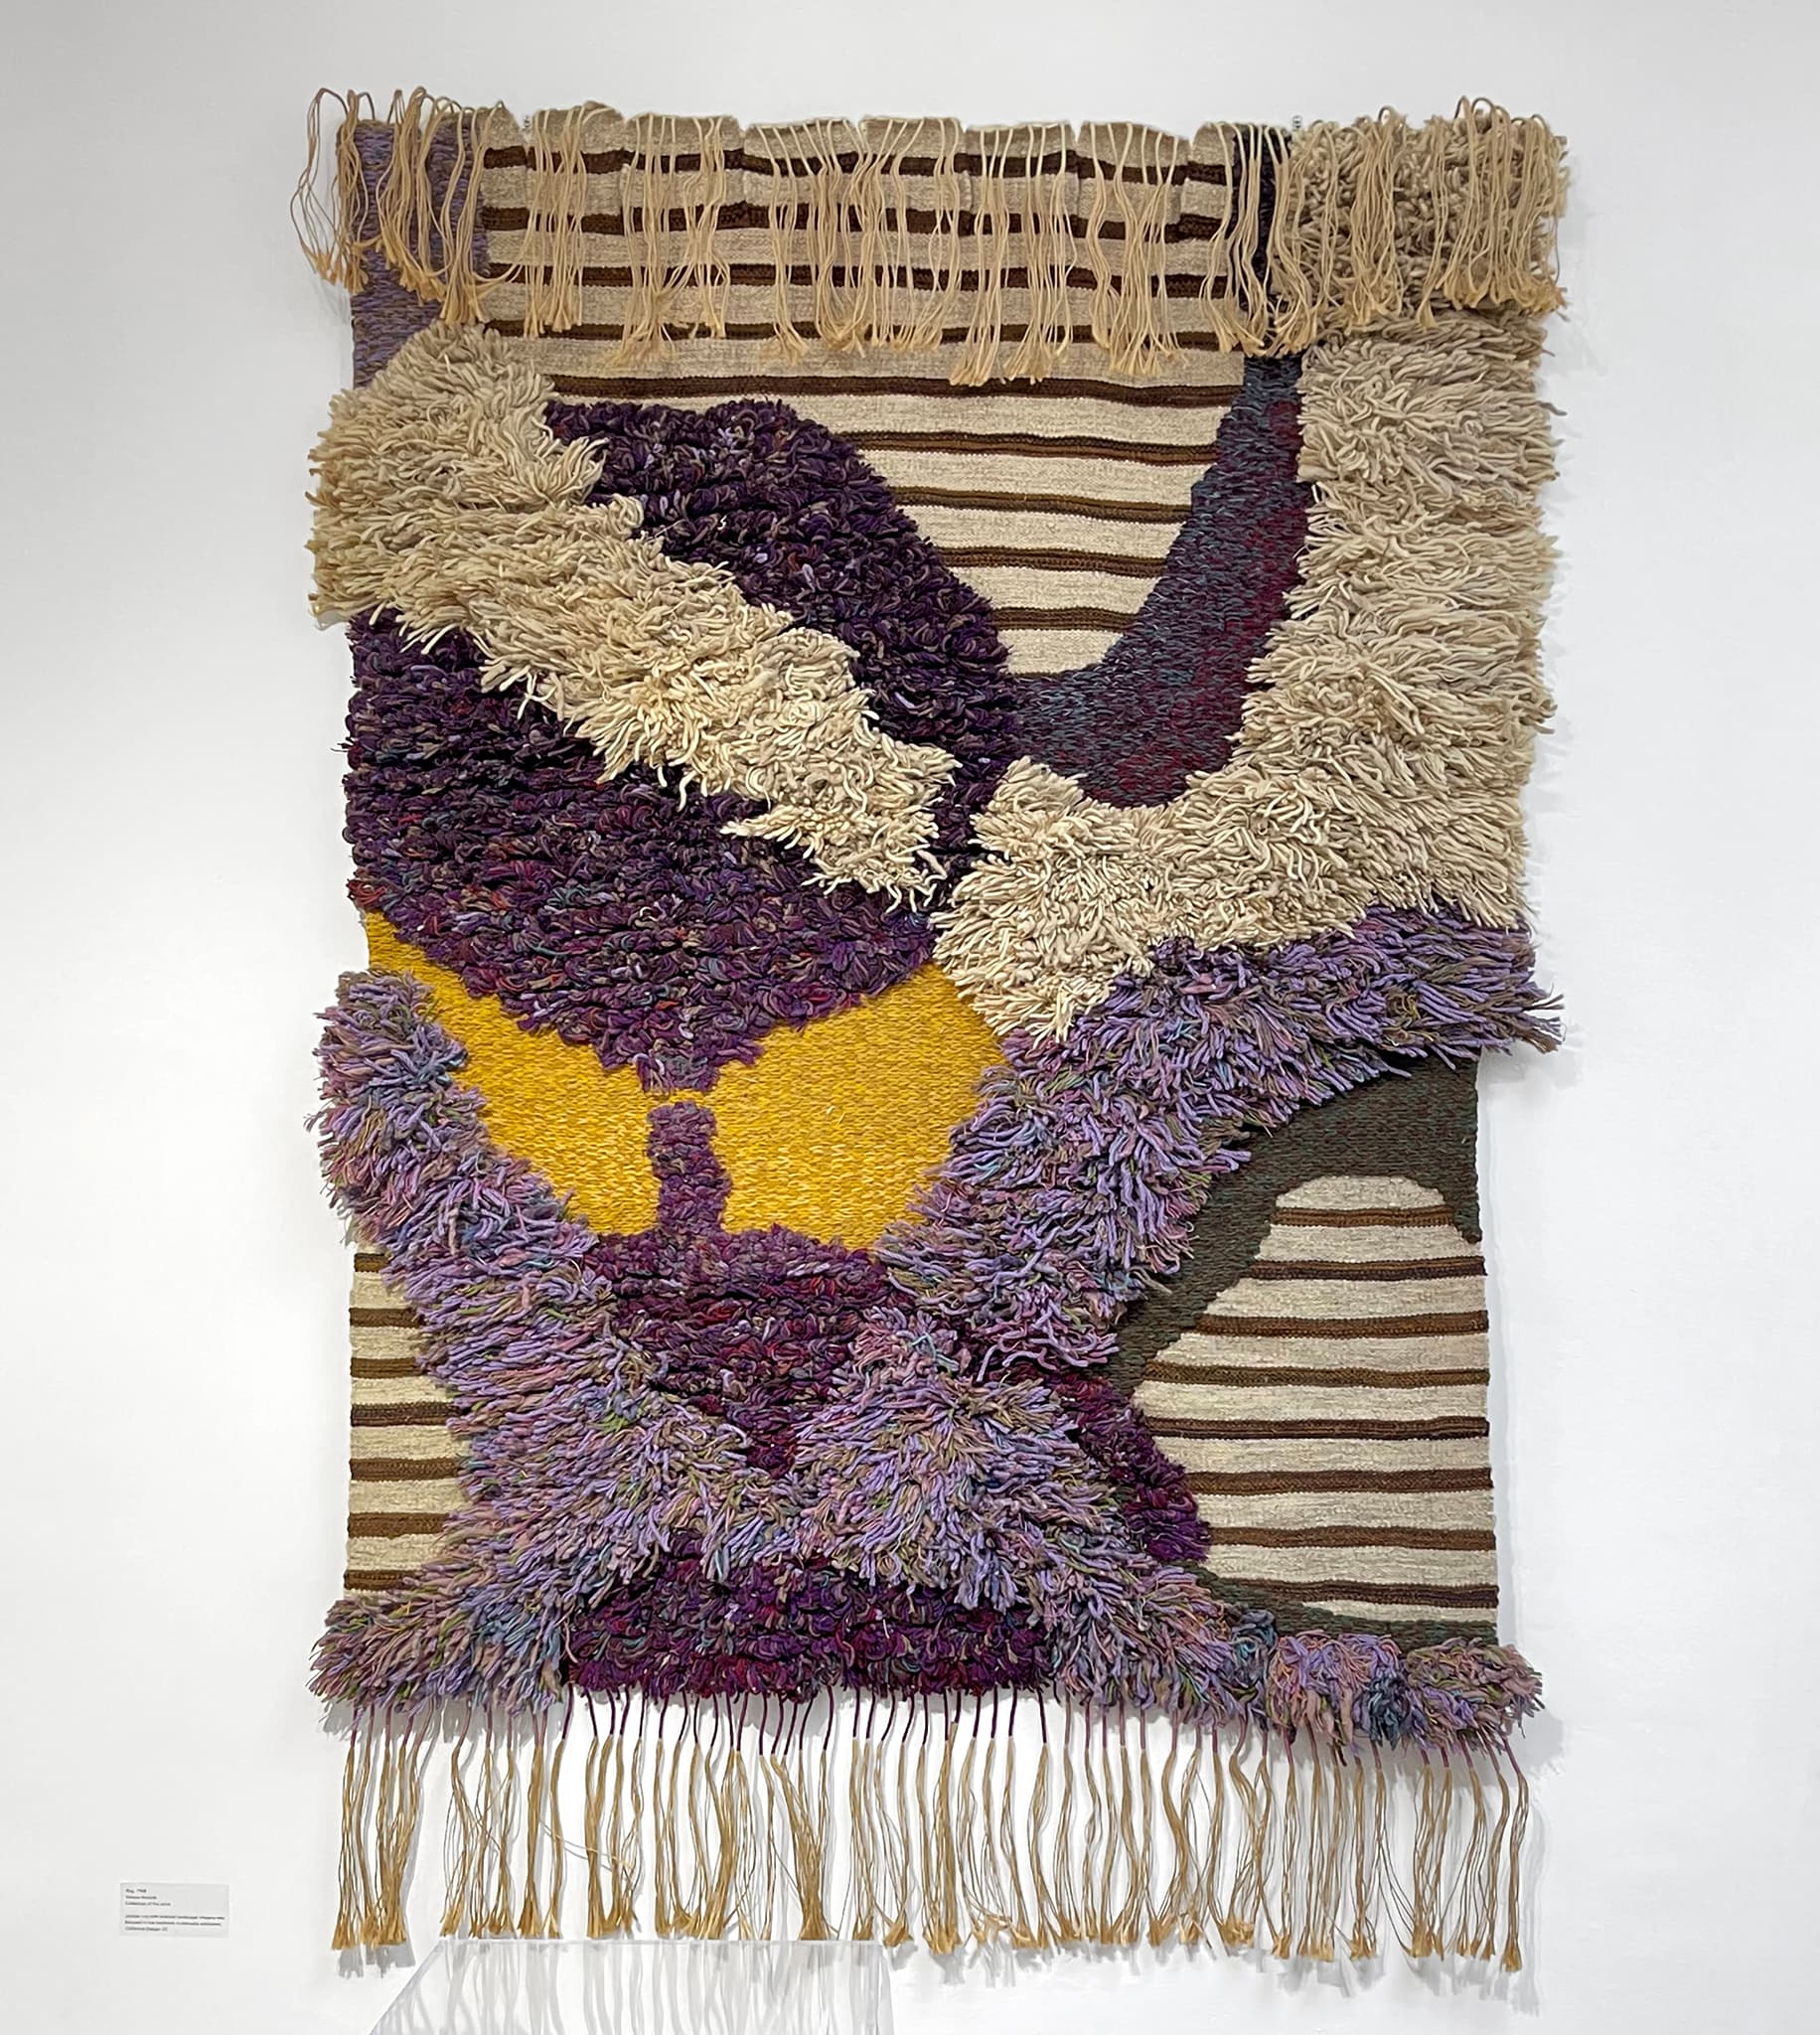 Ferne Jacobs, Rug, c.1968. Building the Essentials, Craft in America